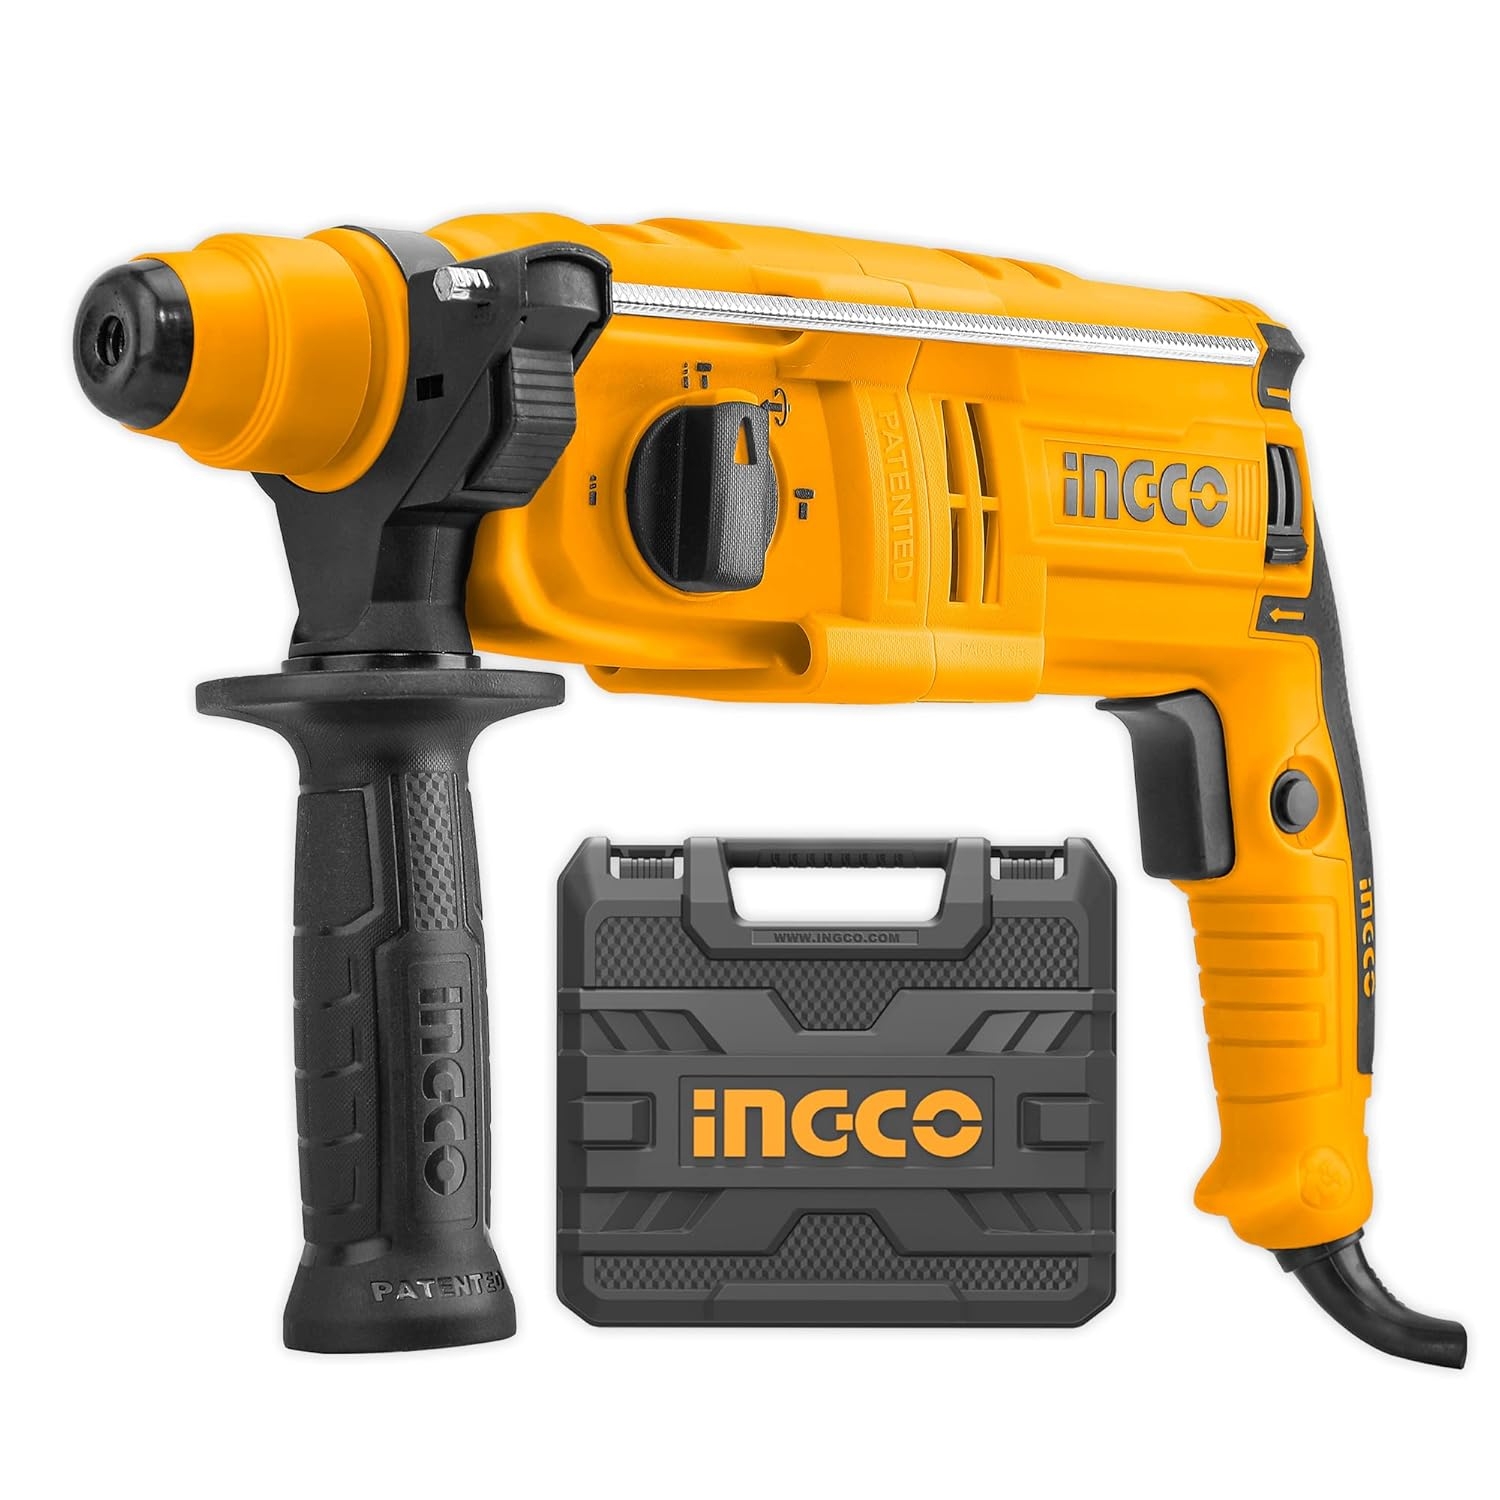 INGCO RGH6528 Rotary Hammer, 650w, 1700rpm, 0-5500bpm, 1.7J | SDS plus Chuck Concrete/Masonry Corded Rotary Hammer | 3 Drills, Carbon Brushes Rotary Hammers